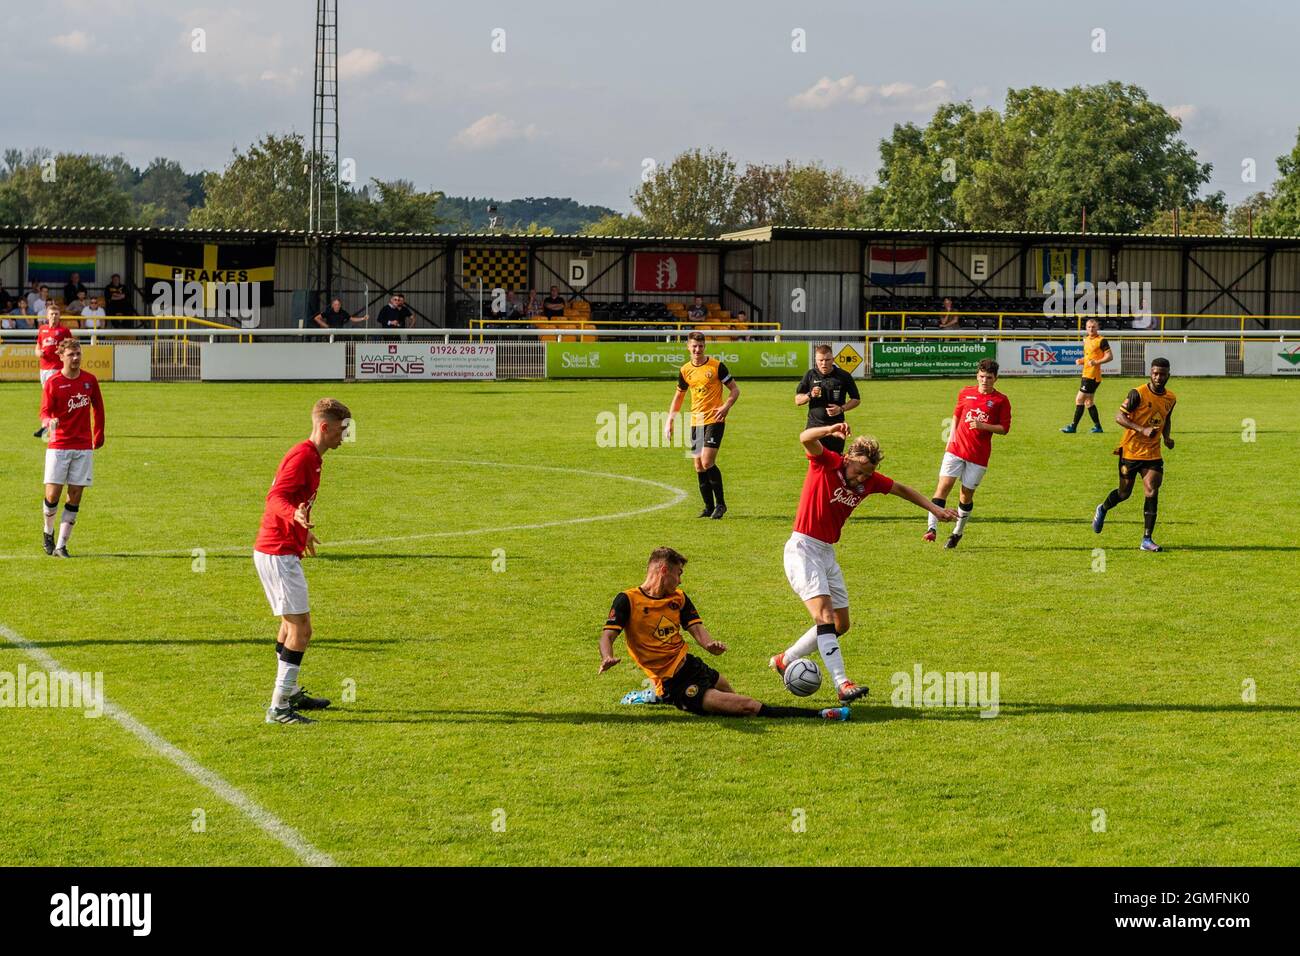 Leamington, Warwickshire, UK. 18th Sep, 2021. Leamington FC played Stone Old Alleynians in the FA Cup 2nd qualfying round at Harbury Lane today. Leamington FC won 3-1 and progress into the next round of the competition. Credit: AG News/Alamy Live News Stock Photo